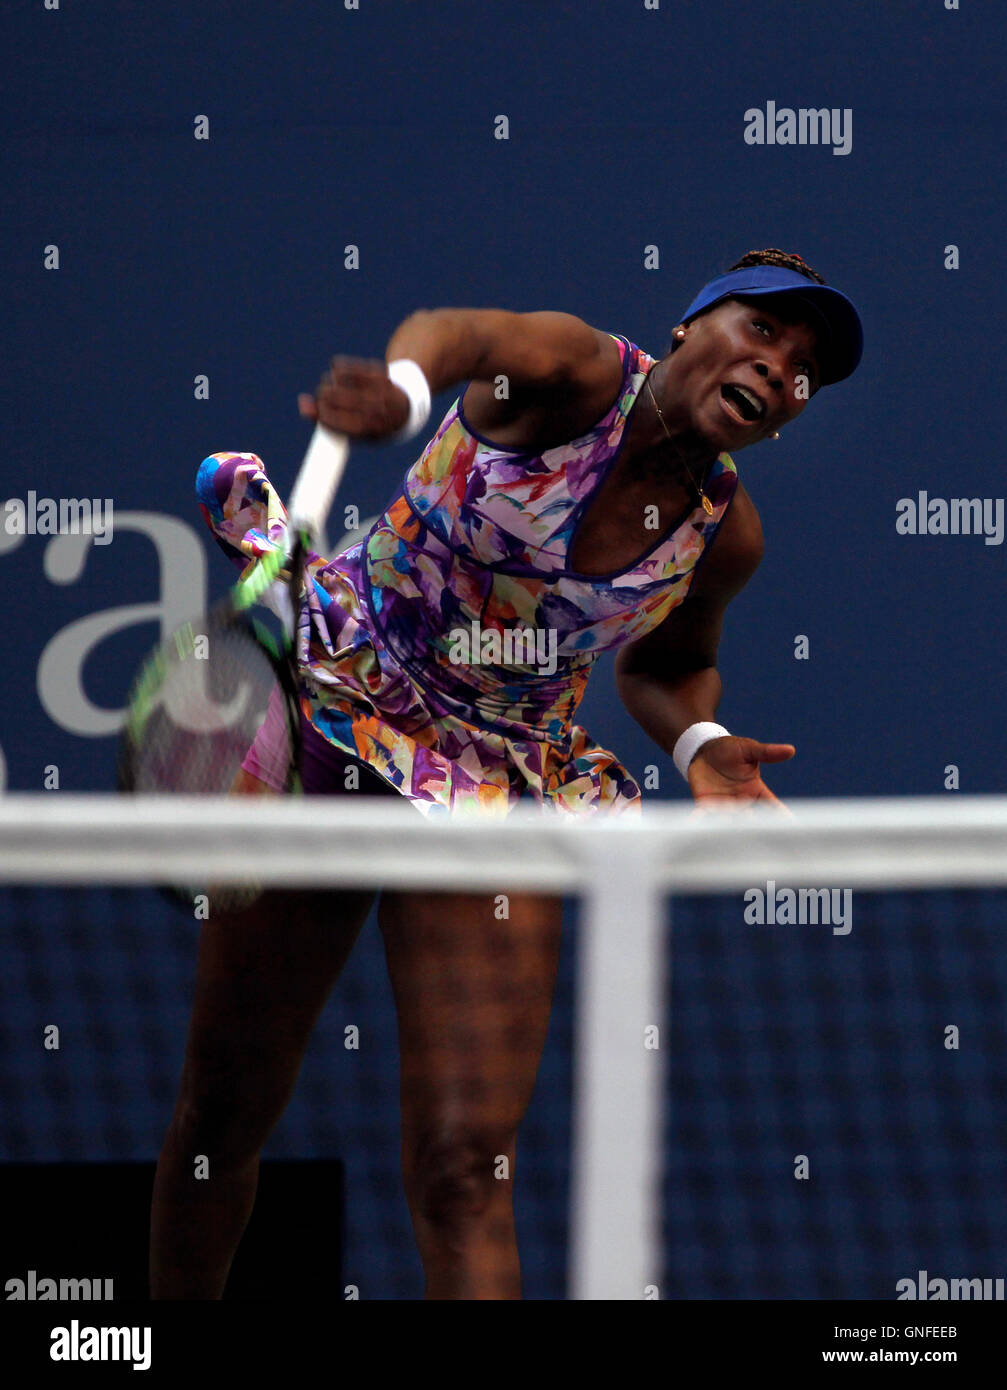 New York, USA. 30th Aug, 2016. Venus Williams serving during her first round match againstt Kateryna Kozlova of Ukraine at the United States Open Tennis Championships at Flushing Meadows, New York on Tuesday, August 30th.   Williams won the match in three sets. Credit:  Adam Stoltman/Alamy Live News Stock Photo